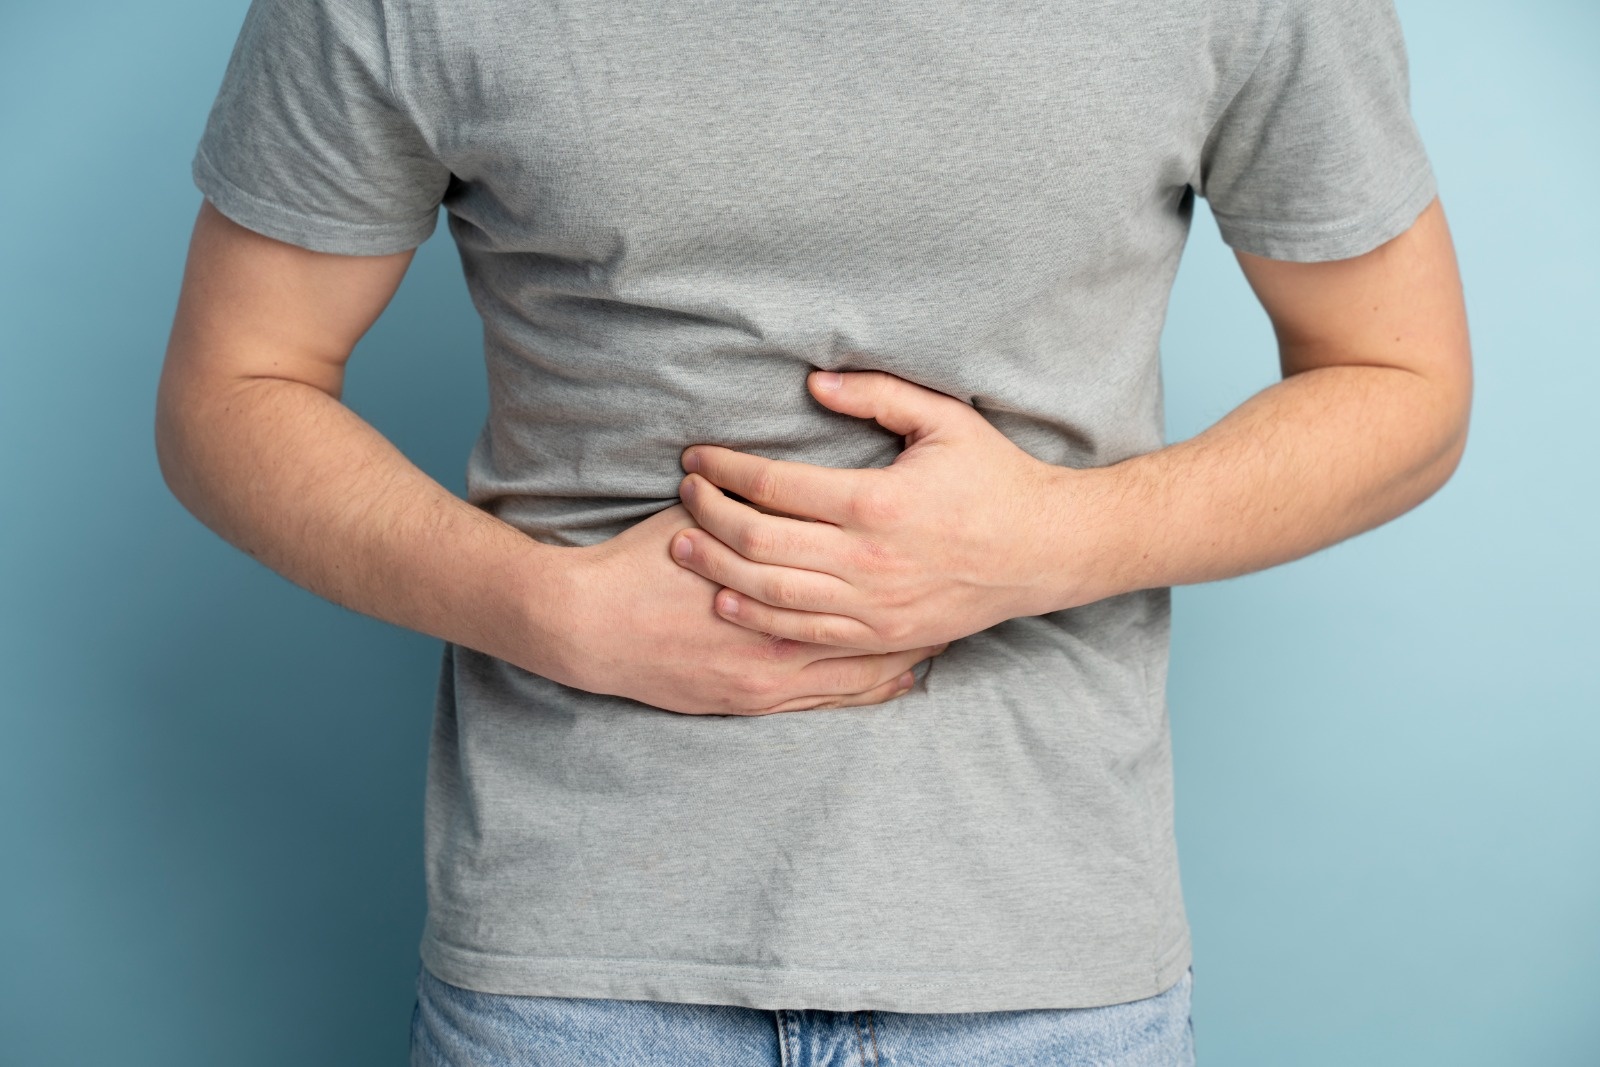 What are some home remedies for constipation?